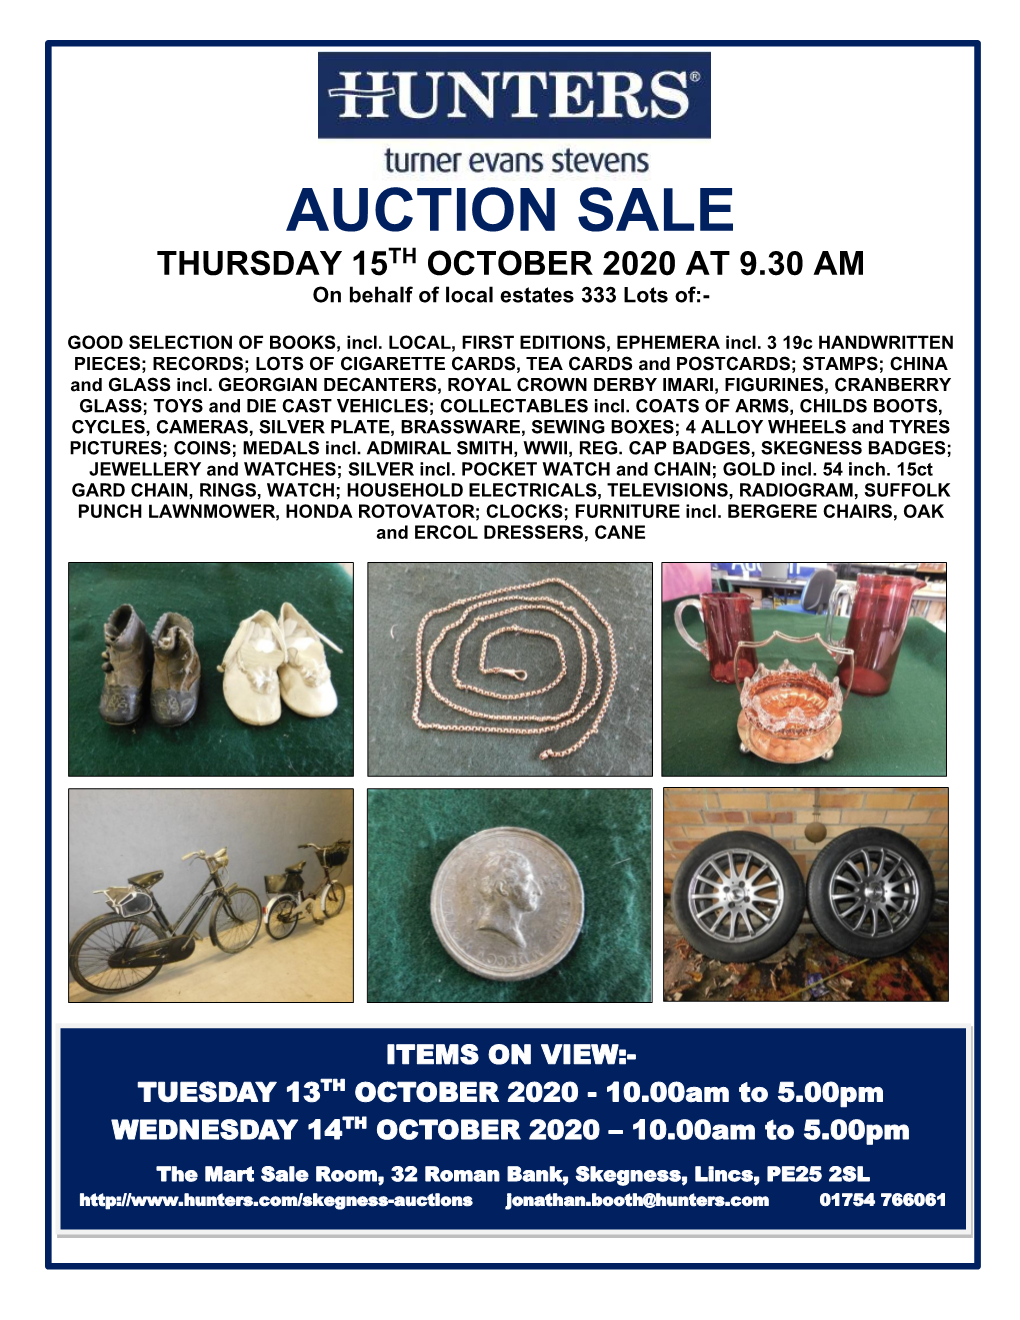 AUCTION SALE TH THURSDAY 15 OCTOBER 2020 at 9.30 AM on Behalf of Local Estates 333 Lots Of